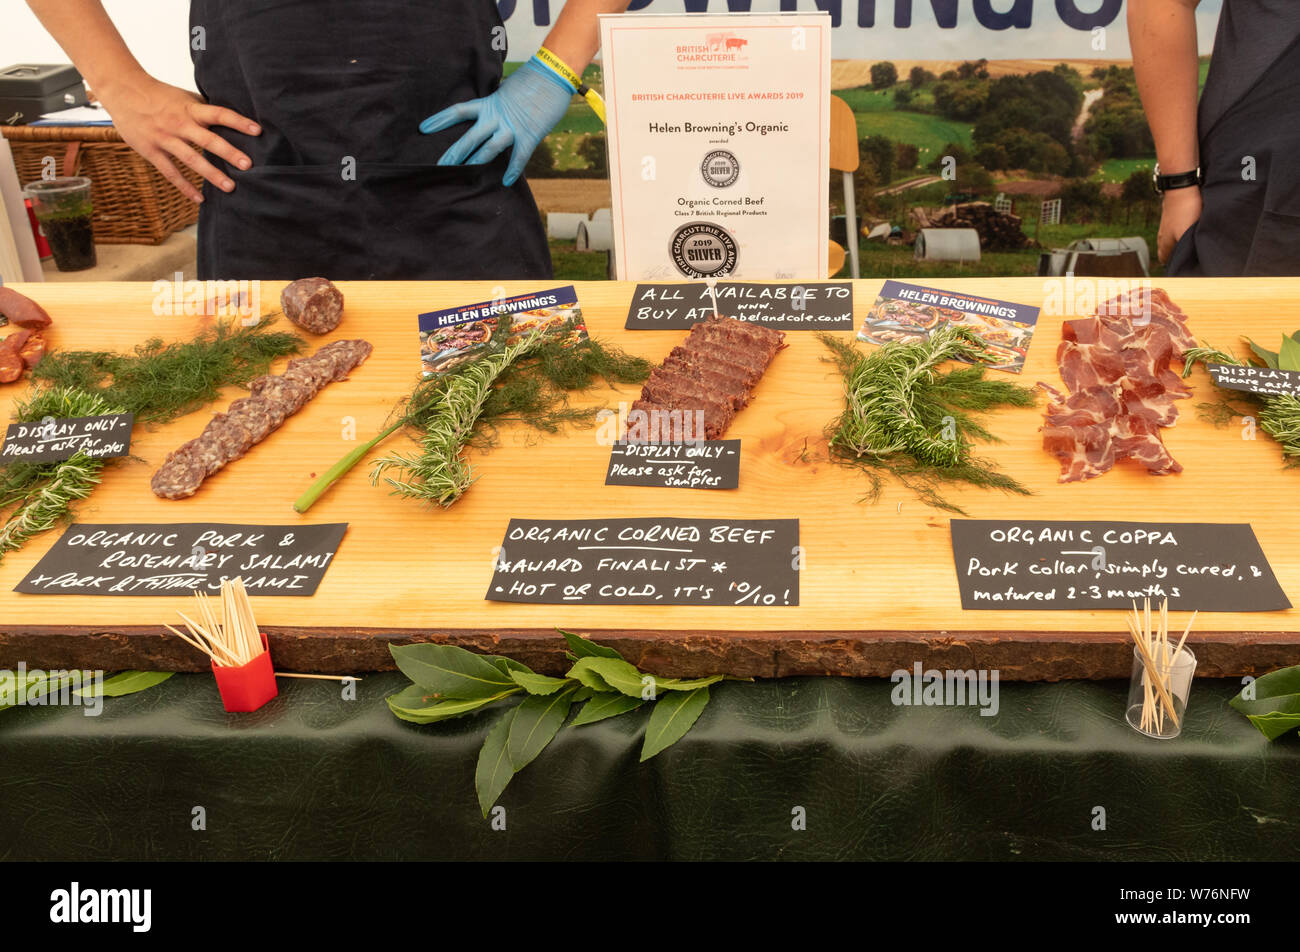 British Charcuterie Live Awards 2019 - processed meat or meats - food competition at Countryfile Live Show, UK Stock Photo